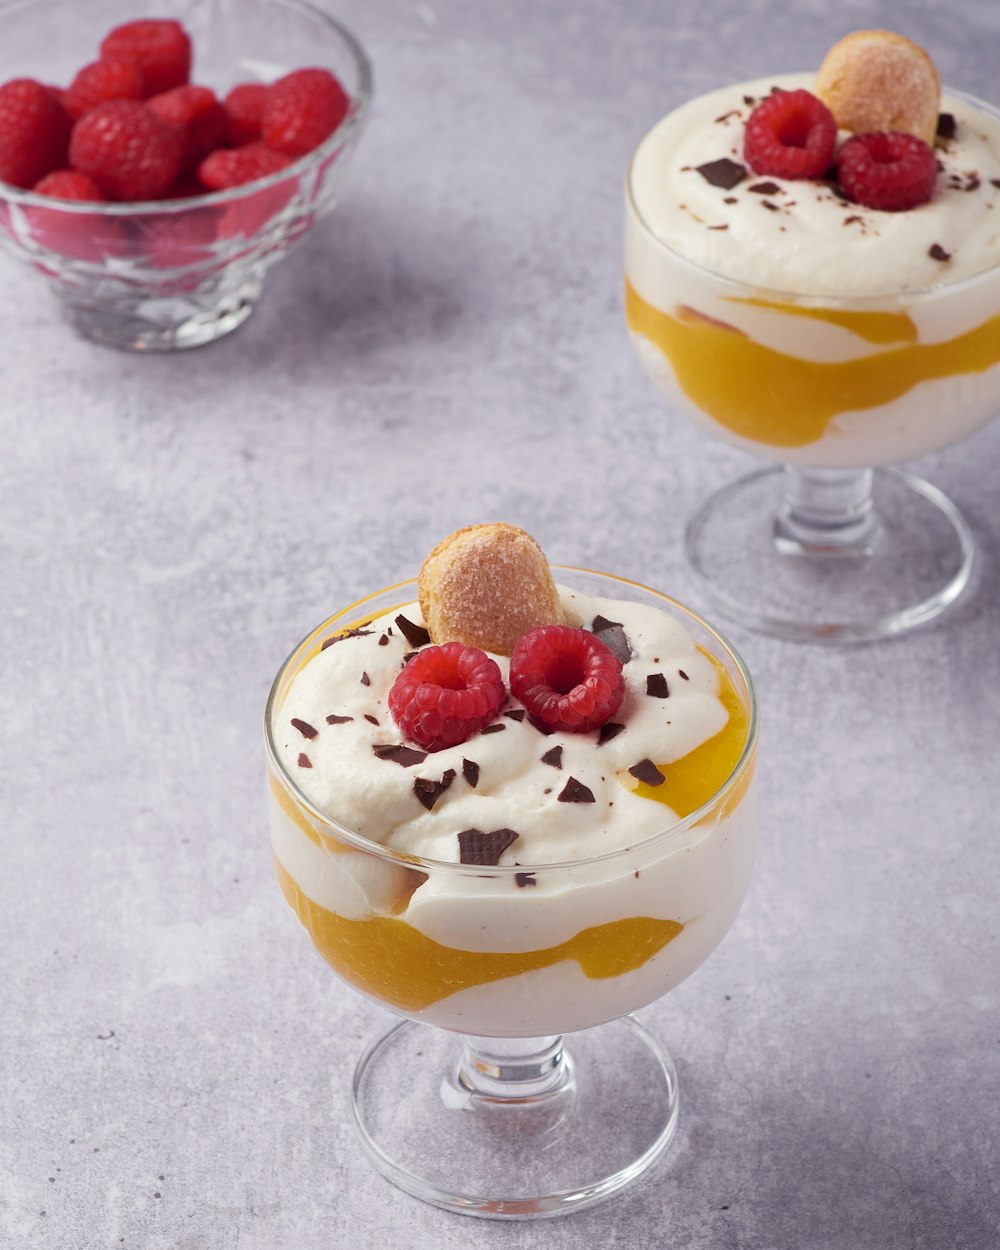 two desserts with raspberries on top of them